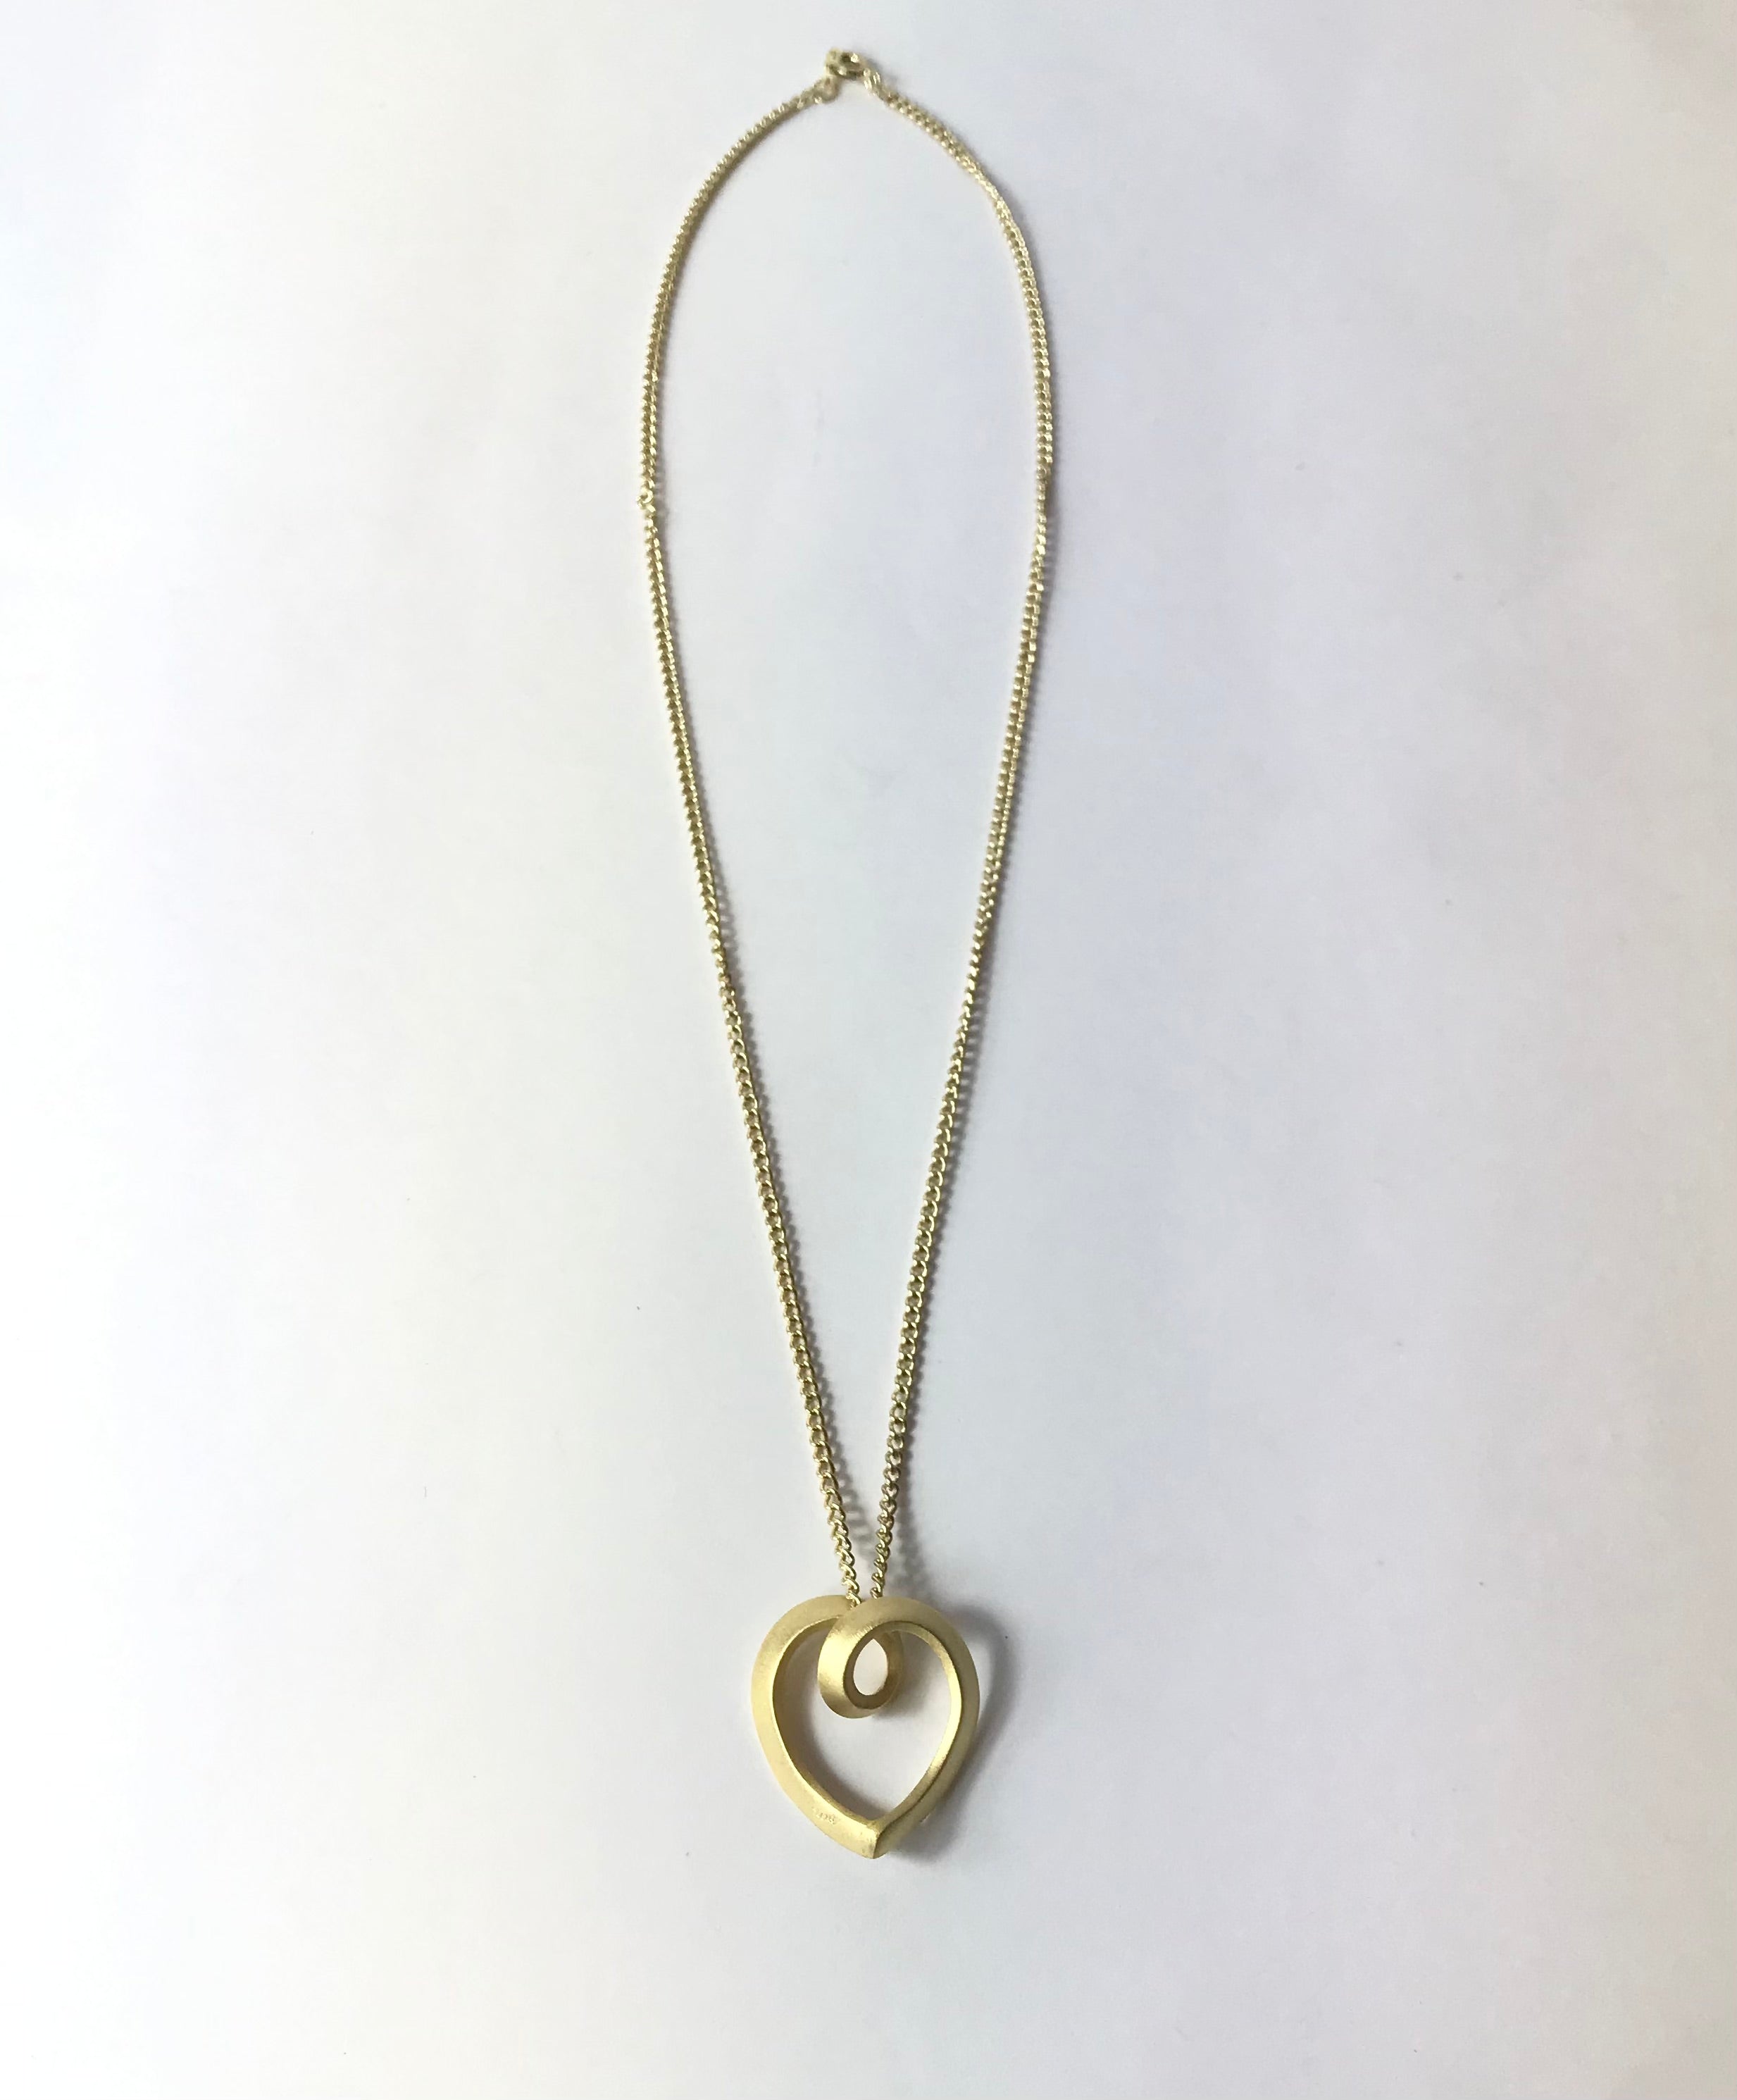 Gold Plated Pendant - The Nancy Smillie Shop - Art, Jewellery & Designer Gifts Glasgow